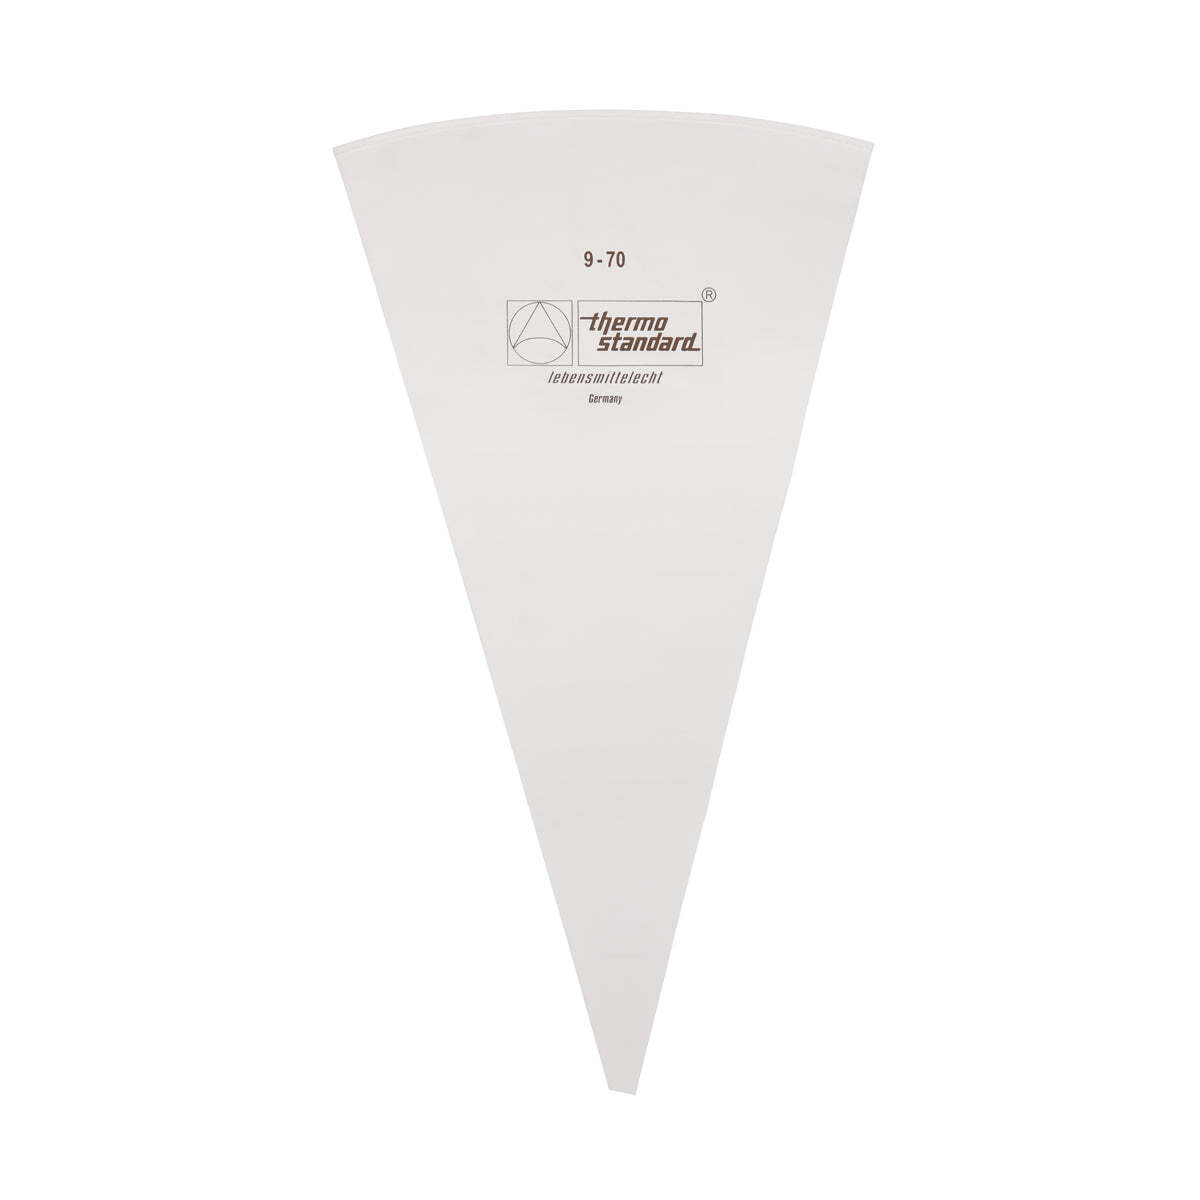 Thermohauser Pastry Bag-700mm Standard